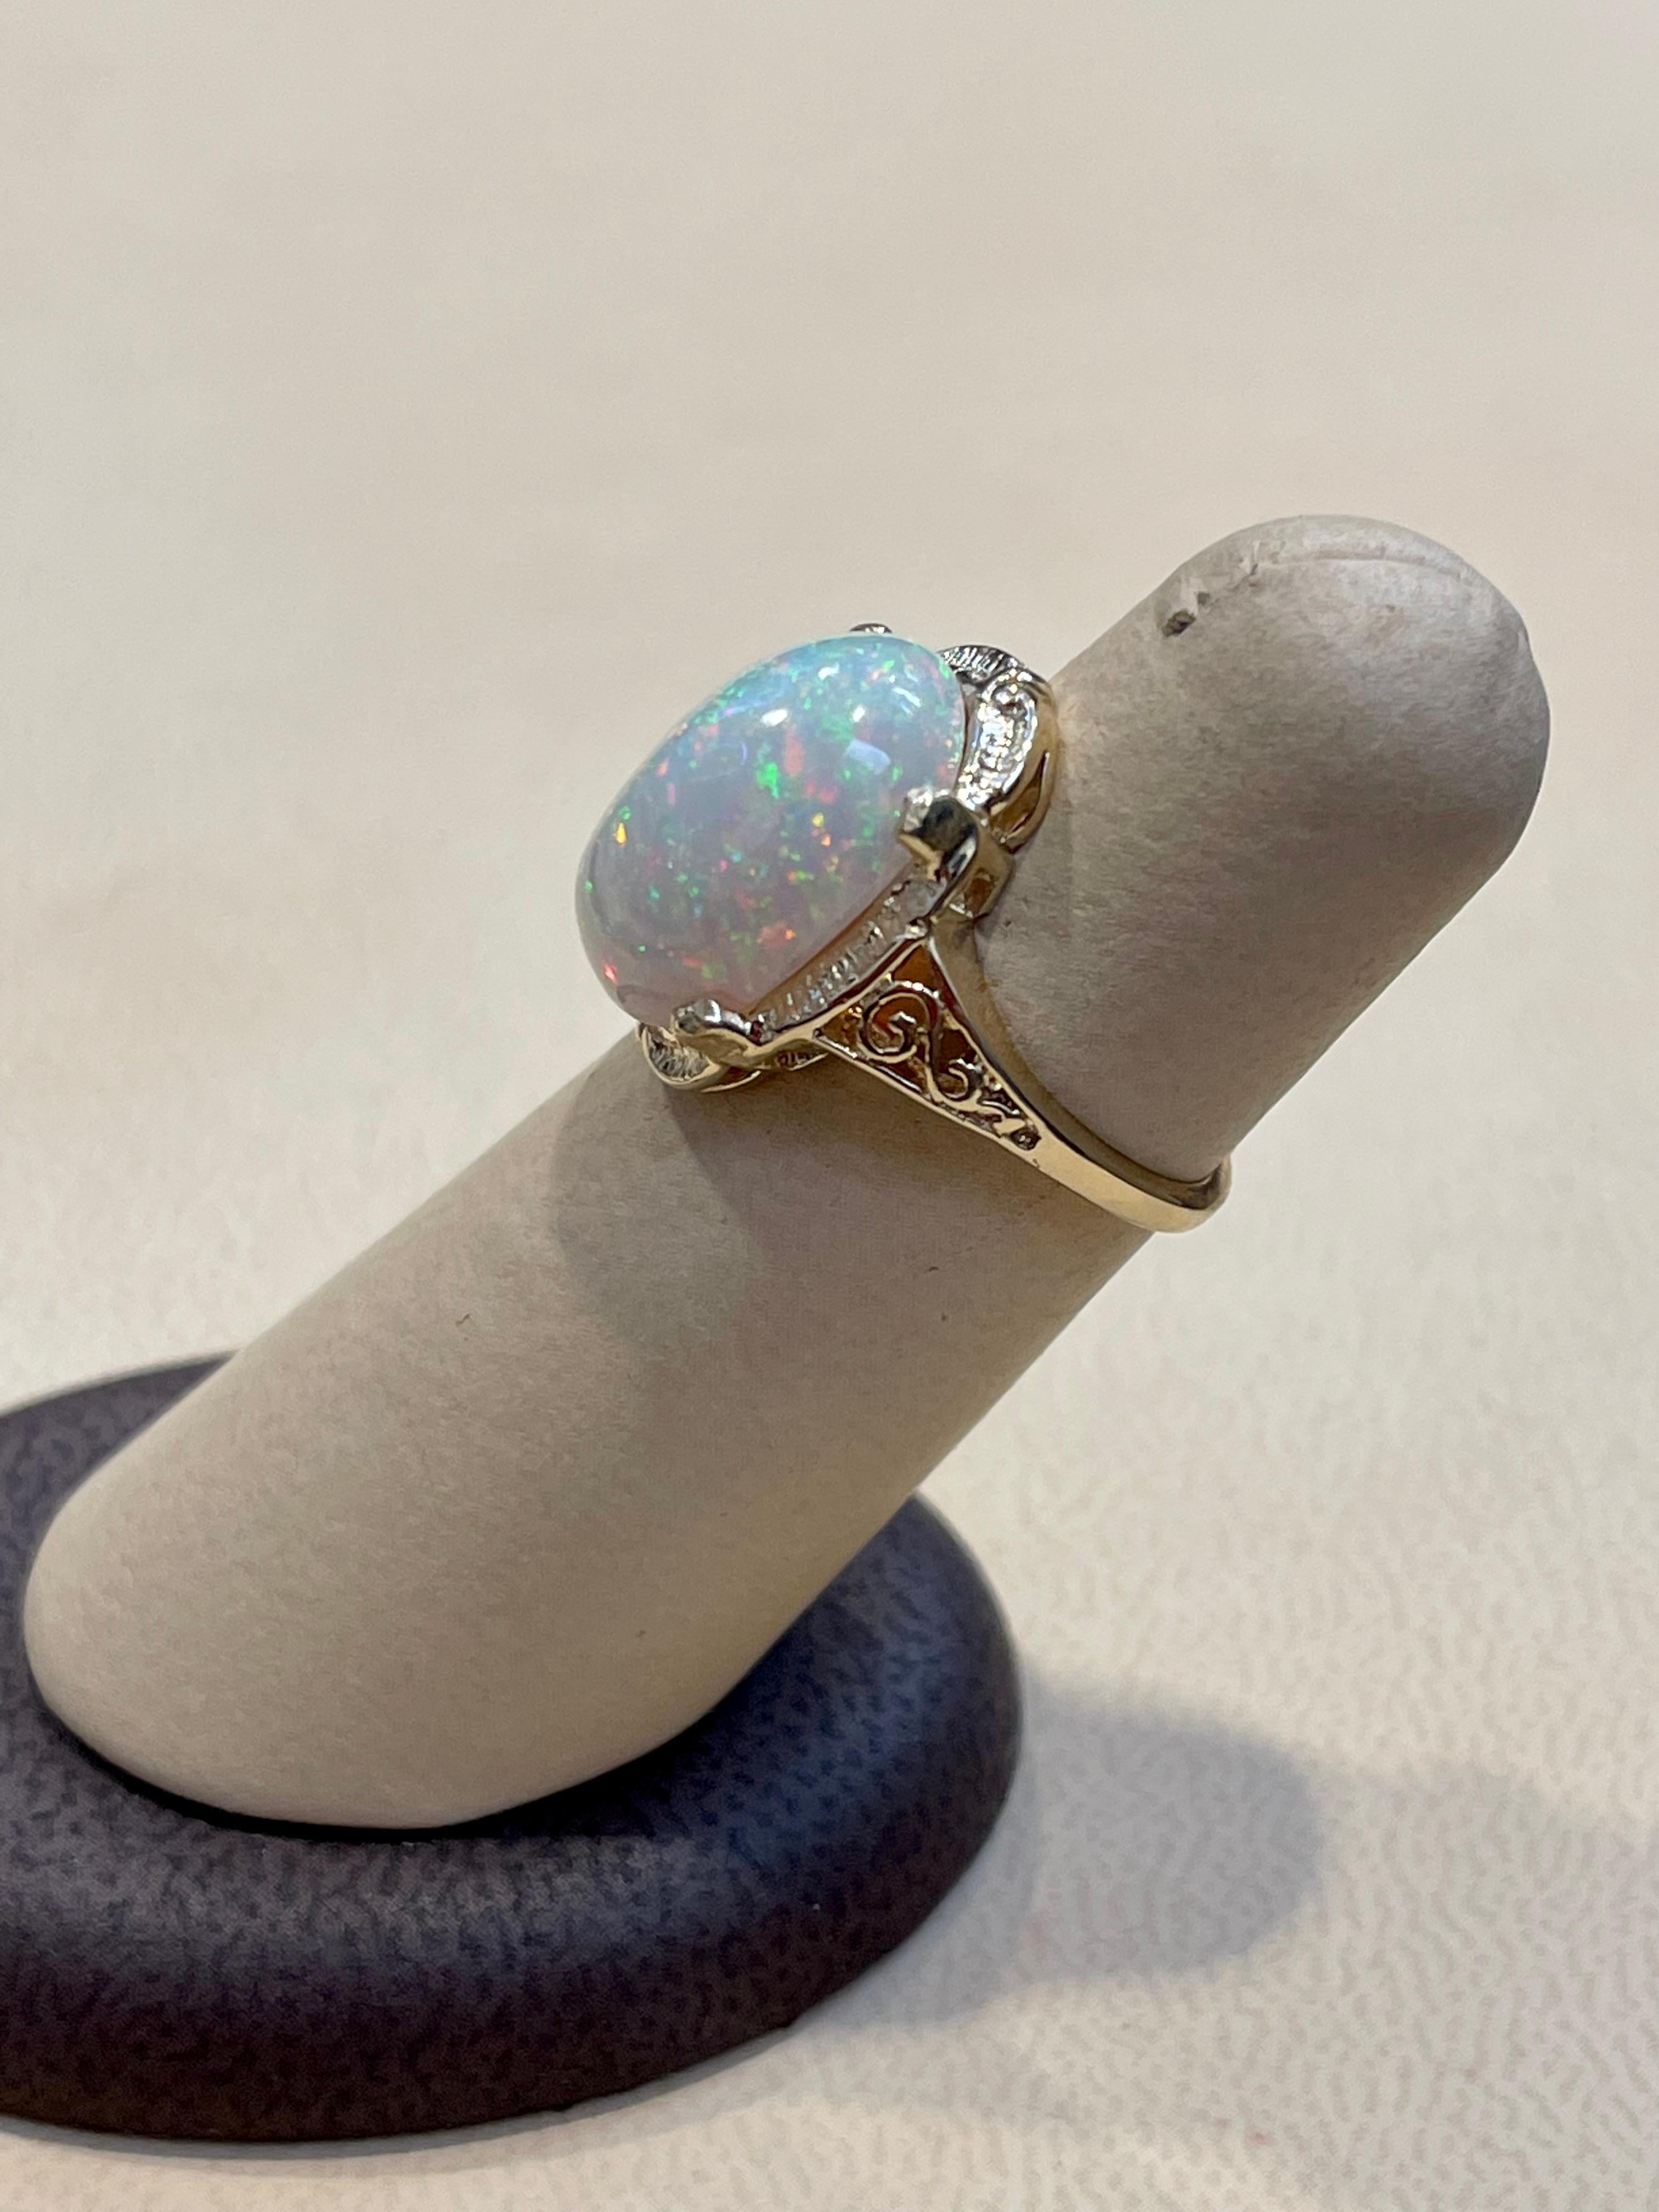 9 Carat Oval Shape Ethiopian Opal Cocktail Ring 14 Karat Yellow Gold For Sale 1